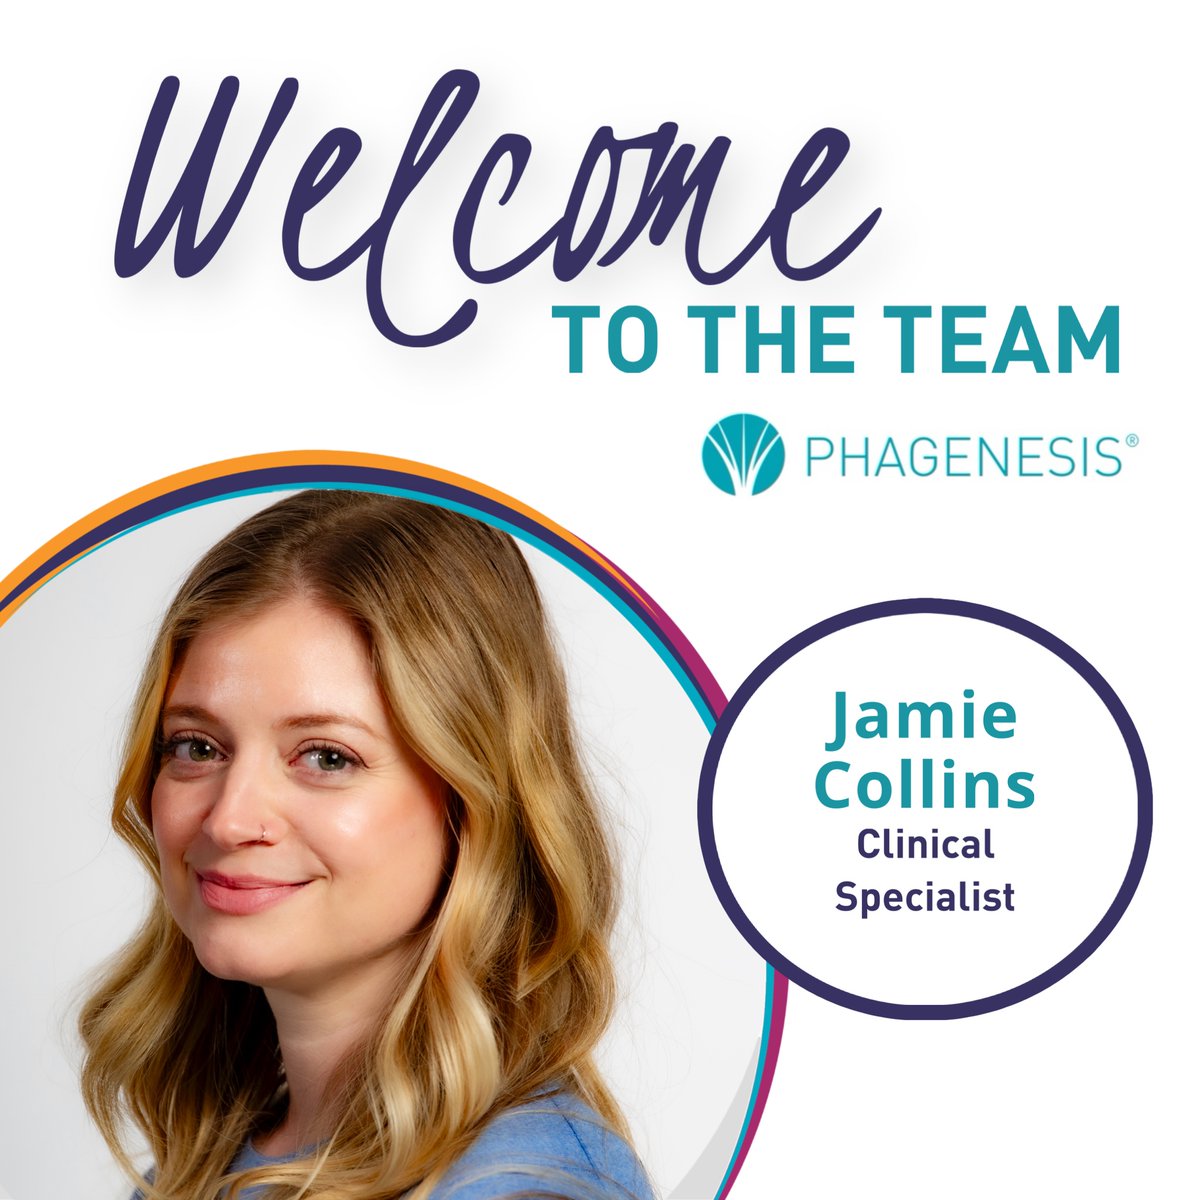 Join us in welcoming Jamie Collins to our team at #Phagenesis! Jamie is joining us as a Clinical Specialist in the US. 🧠 #teamworkmakesthedreamwork